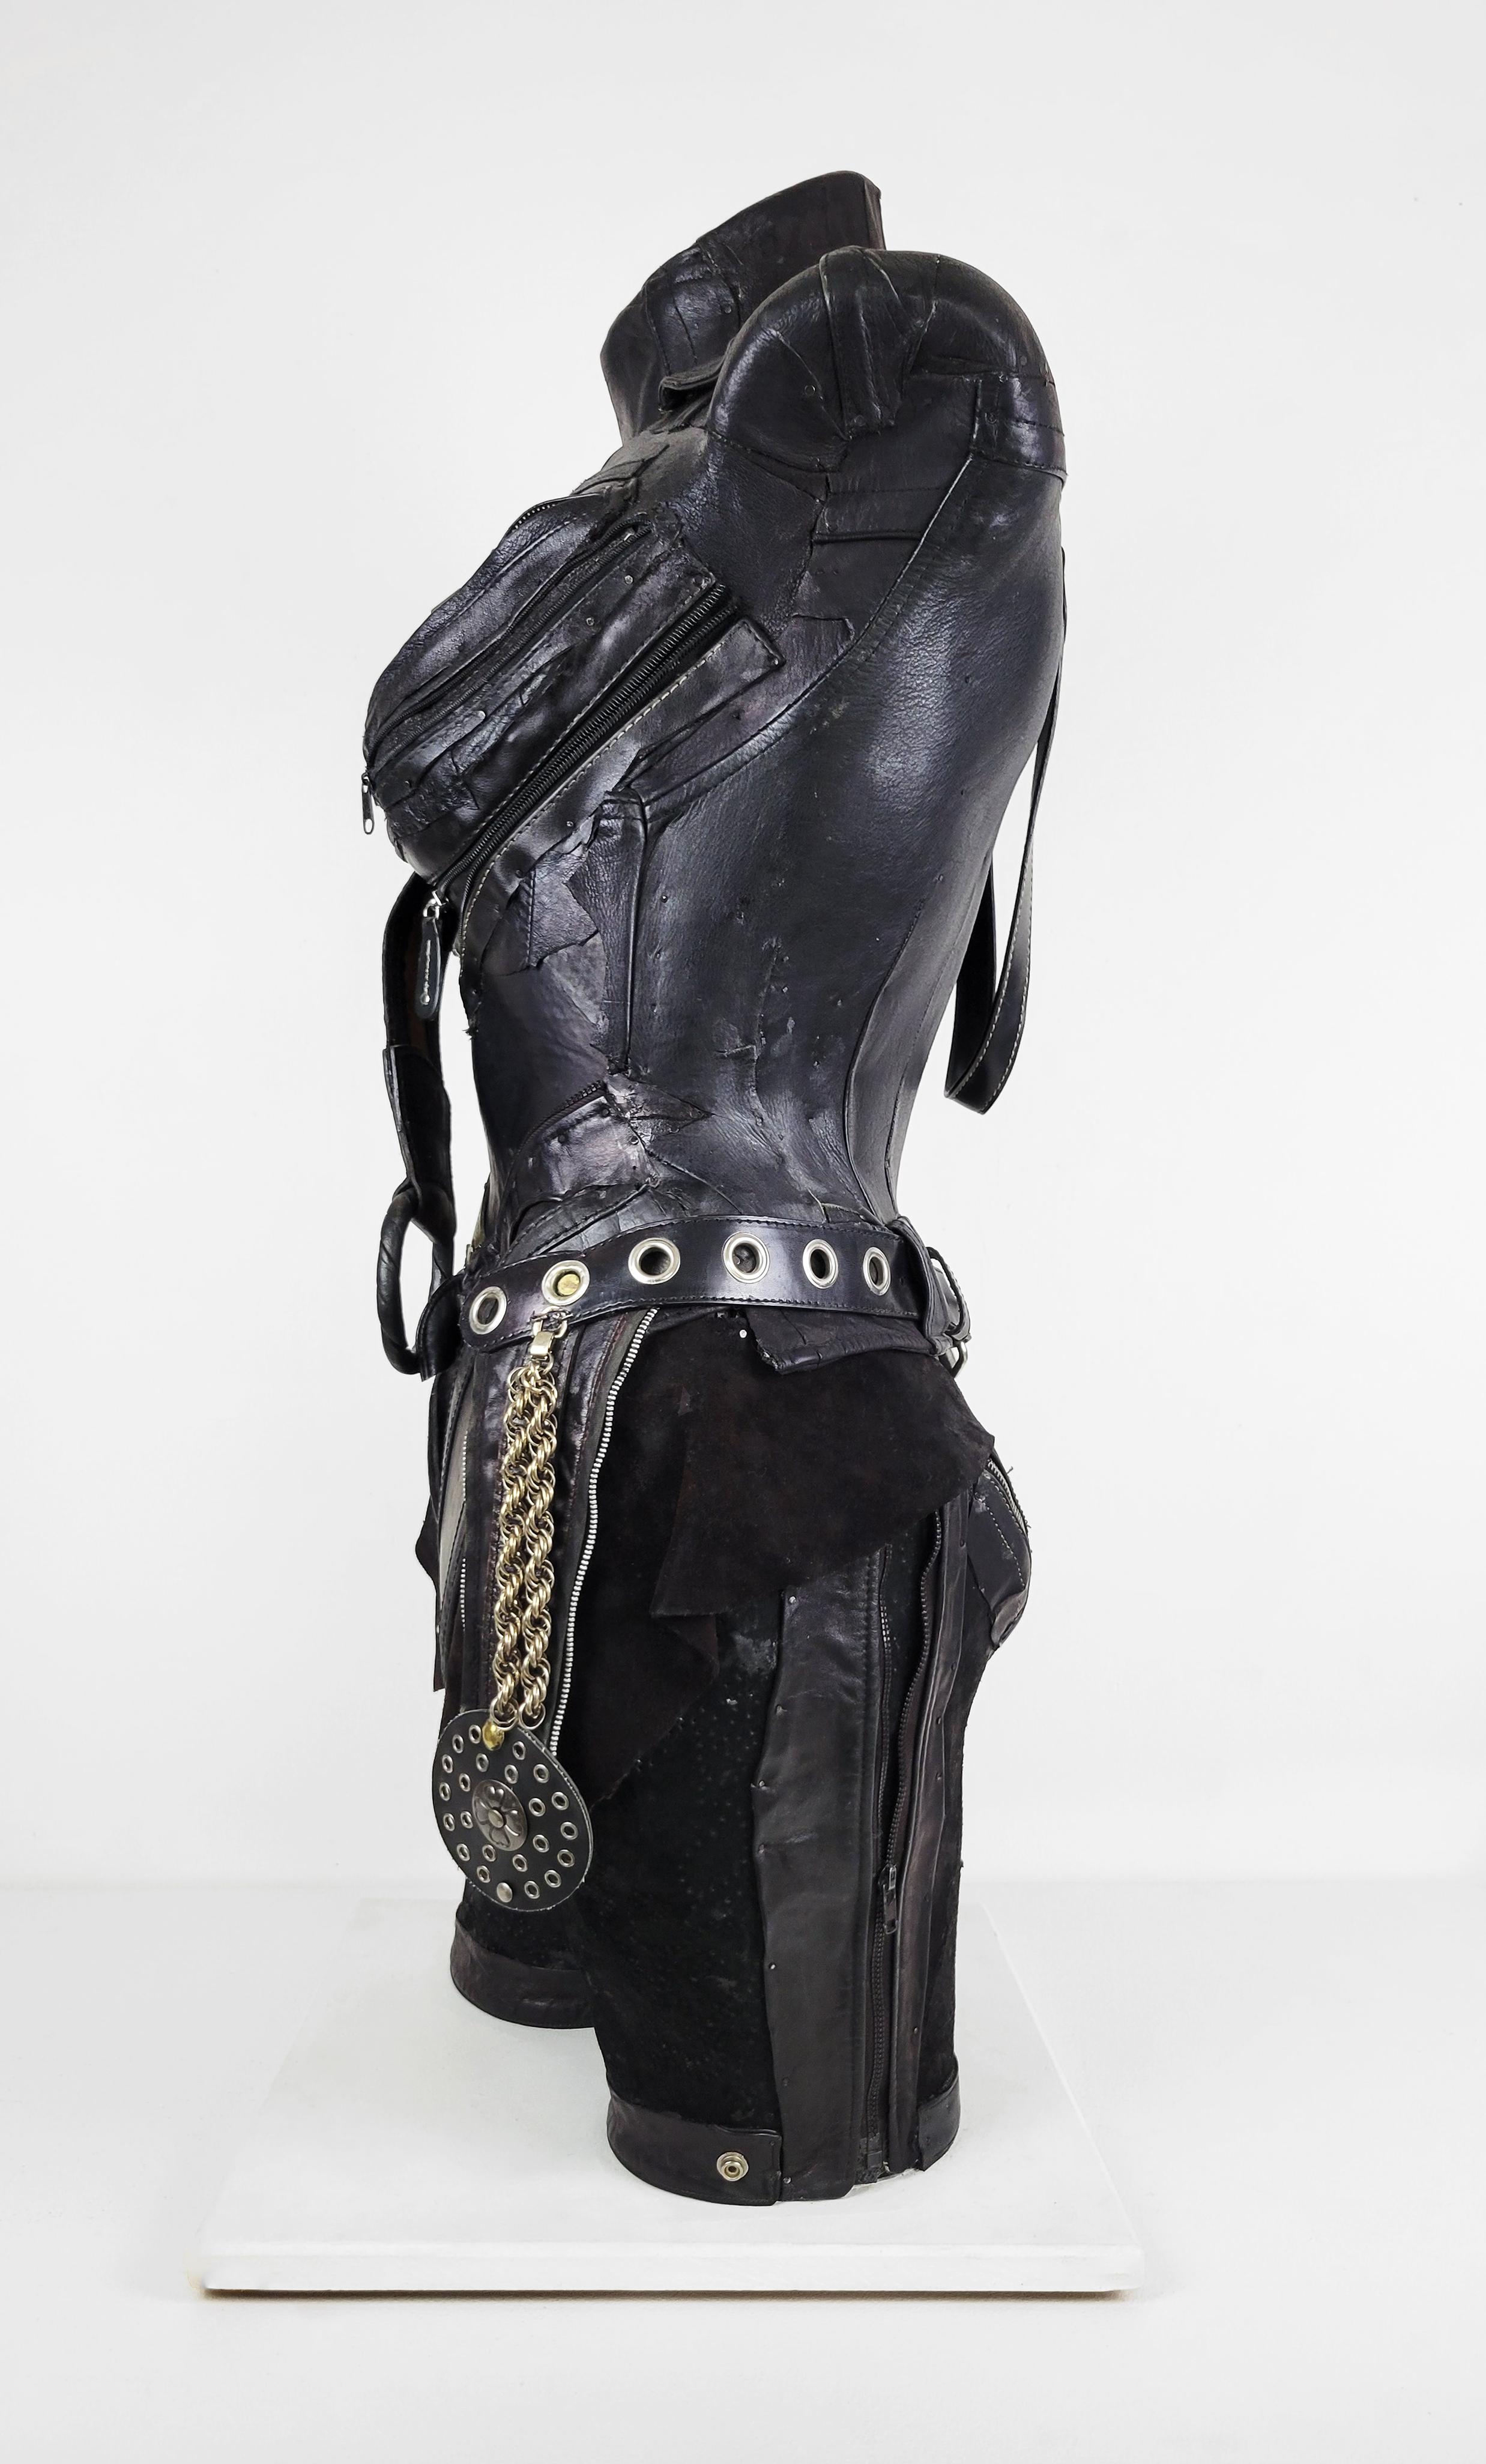 Linda Stein, MascuFem 681 - Feminist Contemporary Black/Silver Leather Metal Torso Sculpture 

Starting in 2007, the artist Linda Stein began to explore gender multiplicities and diversities in her sculptural series The Fluidity of Gender.  The